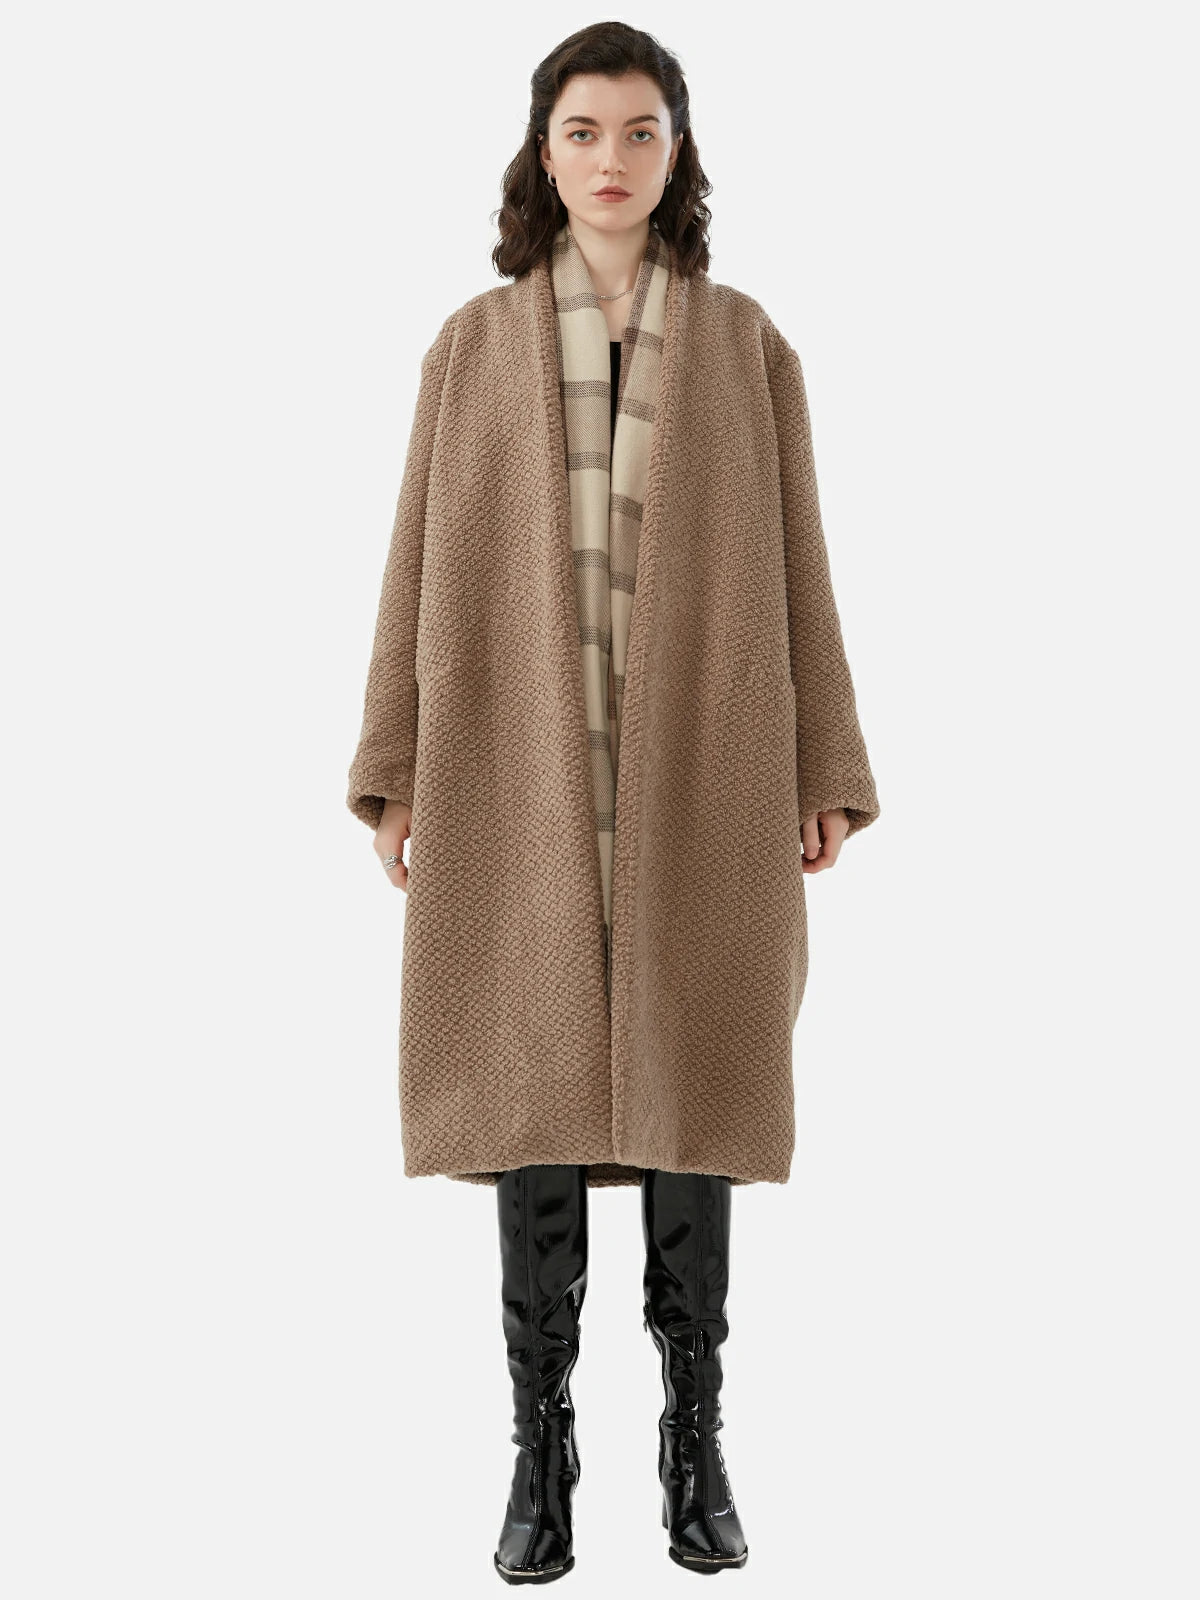 Sherpa Fleece open-front coat for fall/winter fashion, providing comfortable warmth